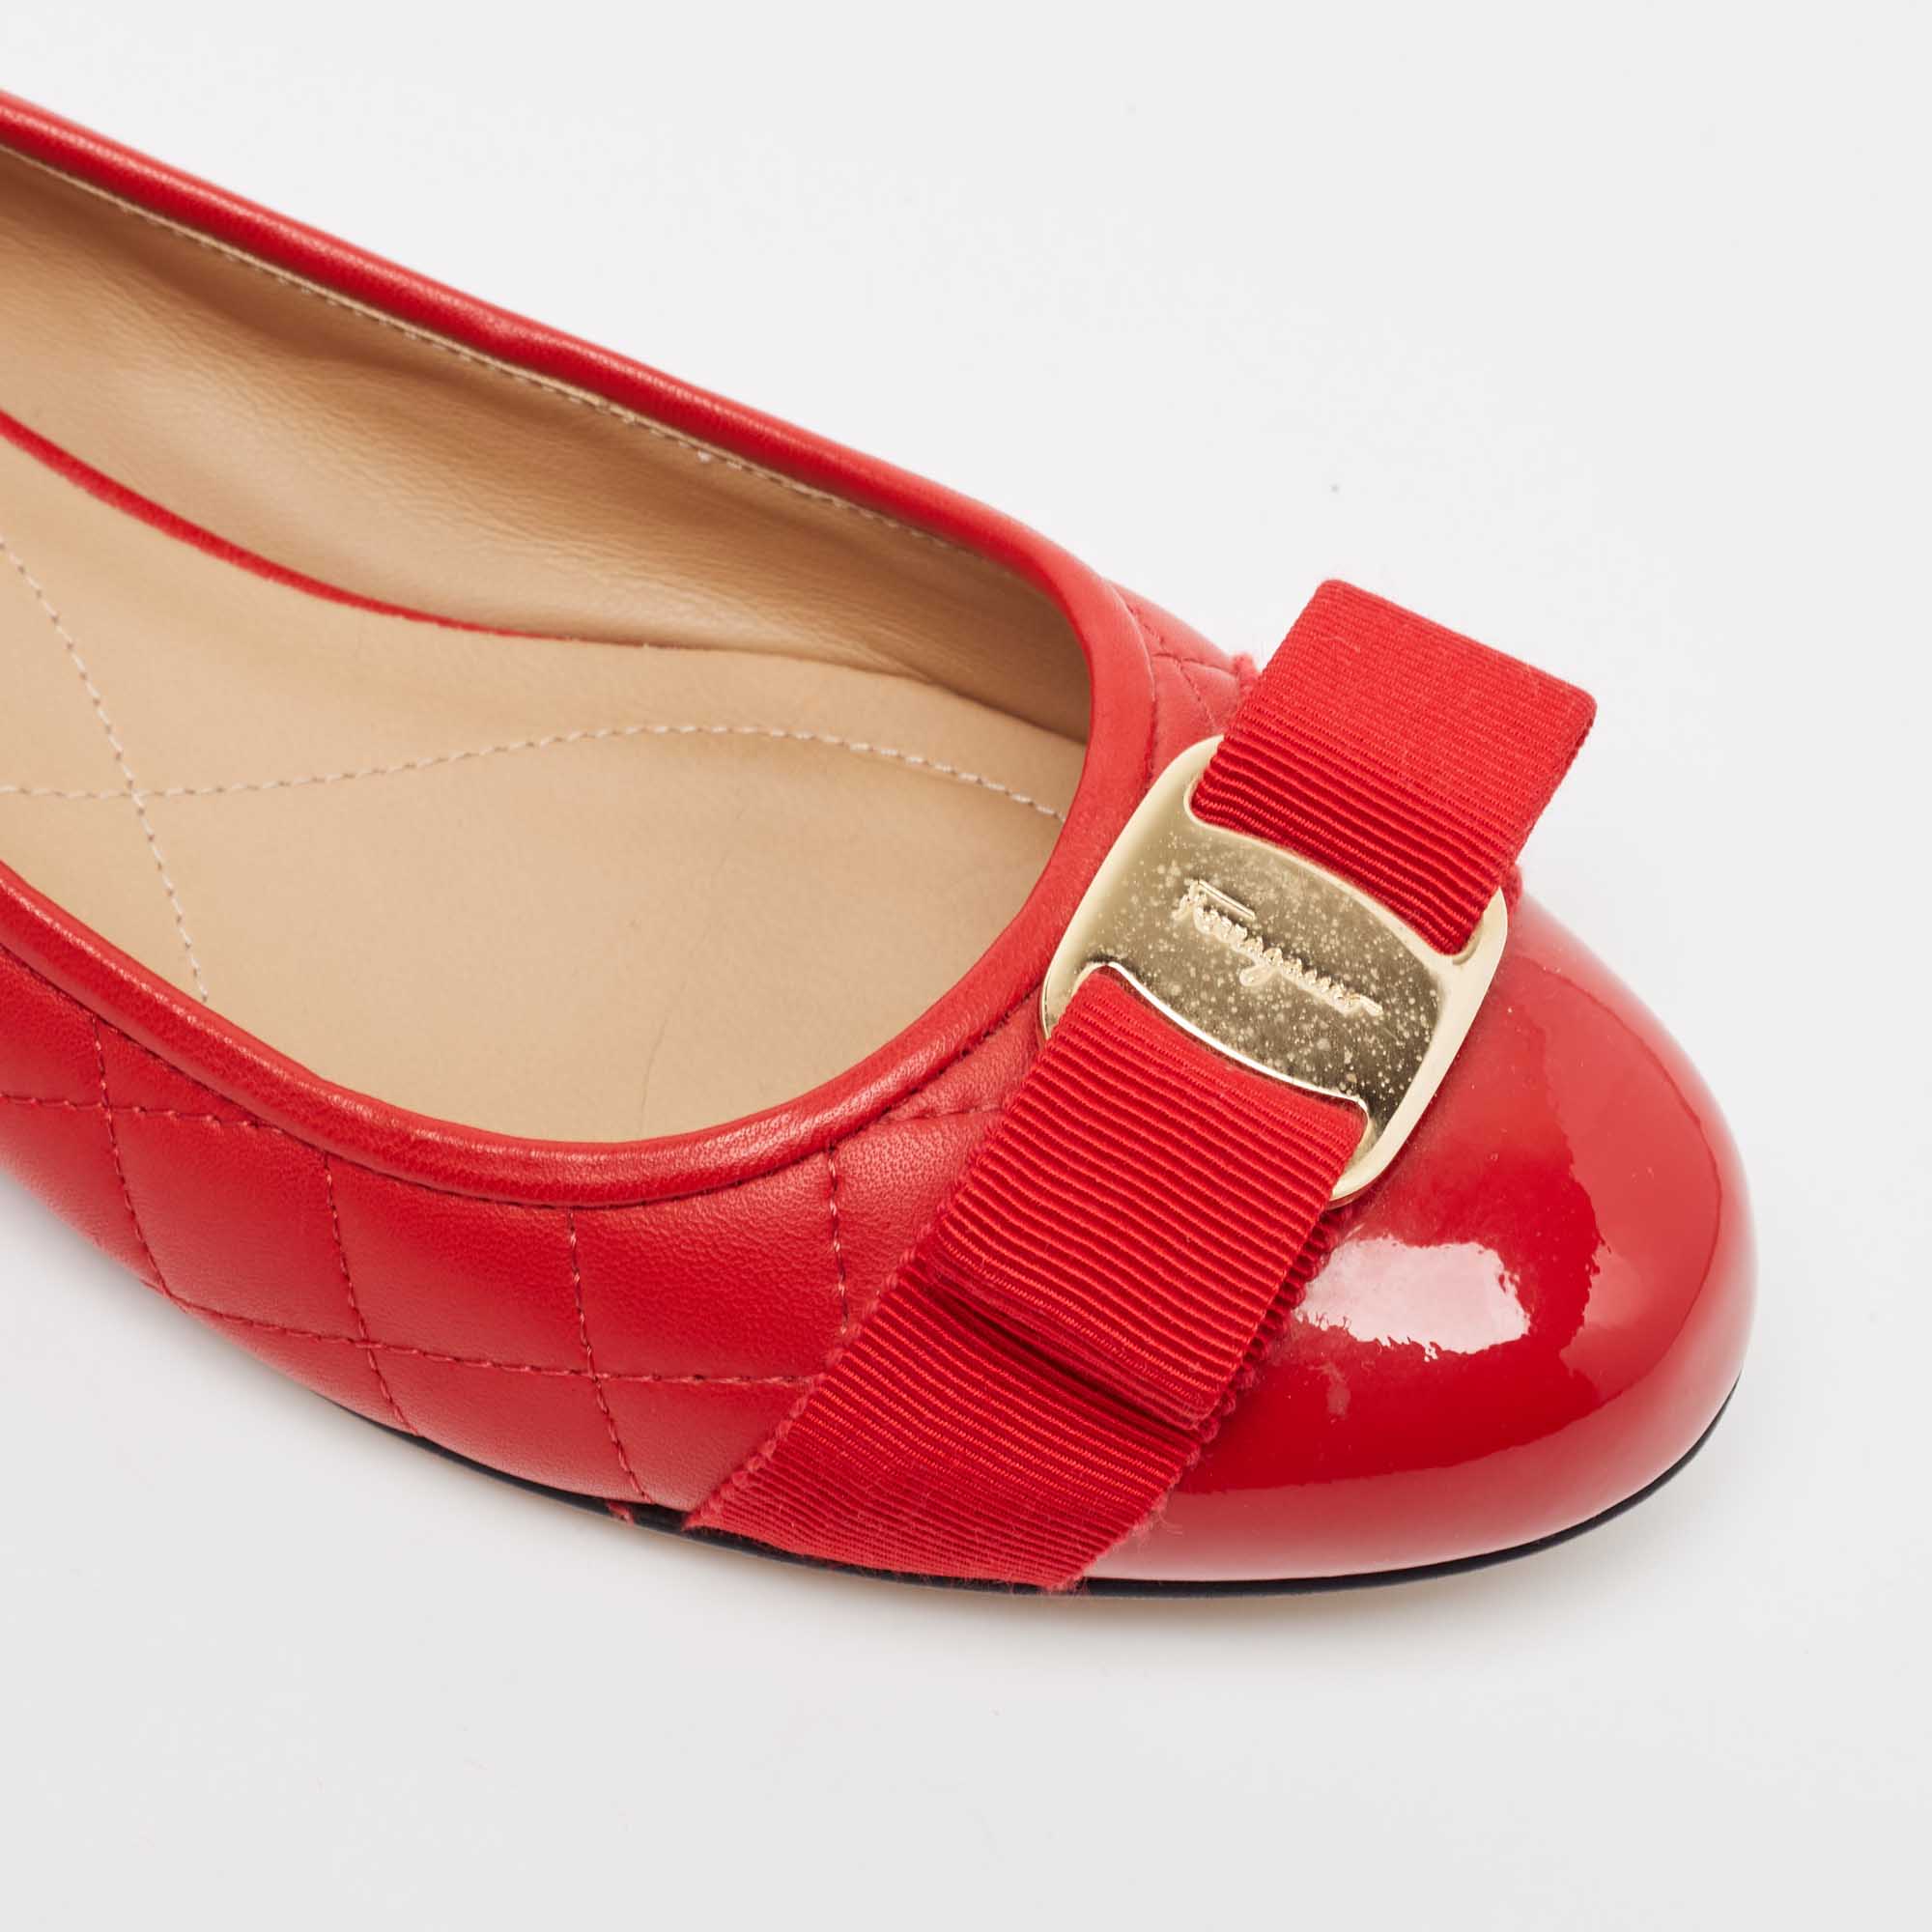 Salvatore Ferragamo Red Patent And Leather Varina Ballet Flats Size 37.5